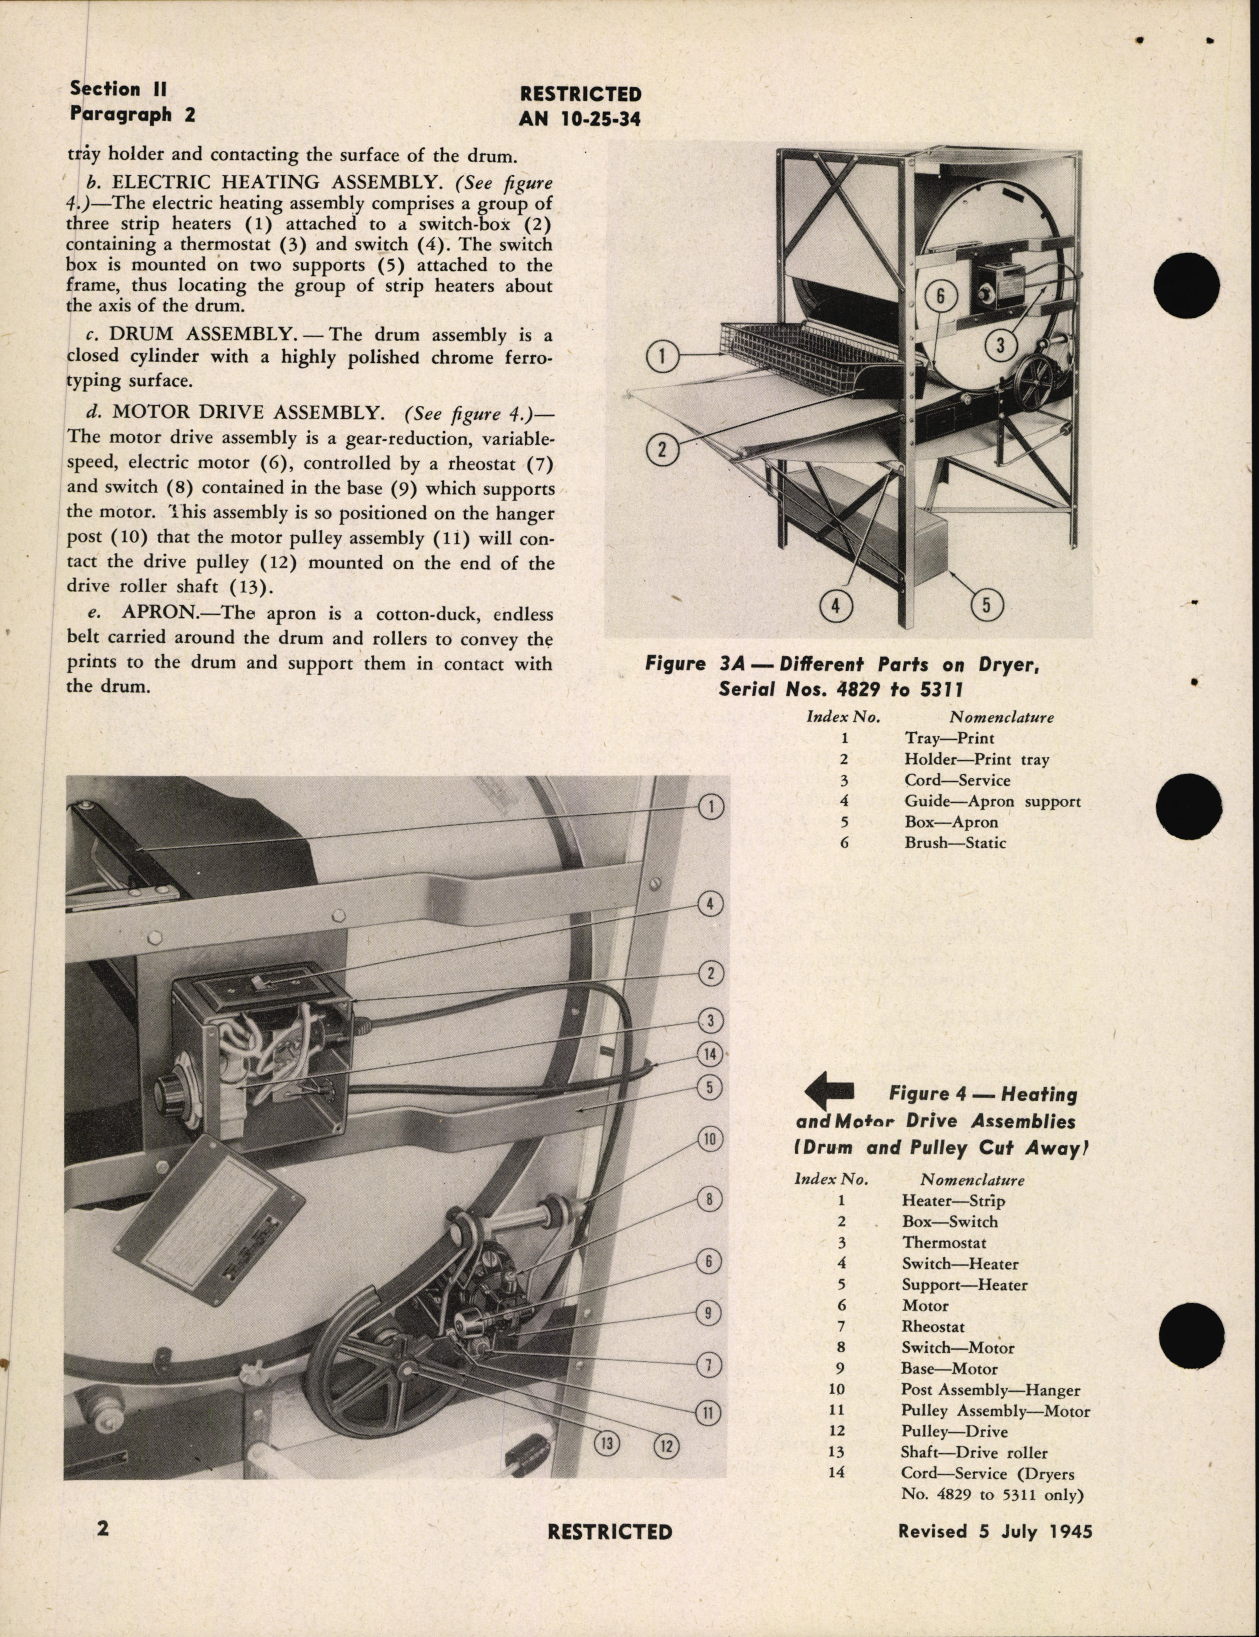 Sample page 8 from AirCorps Library document: Operation, Service, & Overhaul Instructions with Parts Catalog for Type B-10 Photographic Glossy Print Dryer